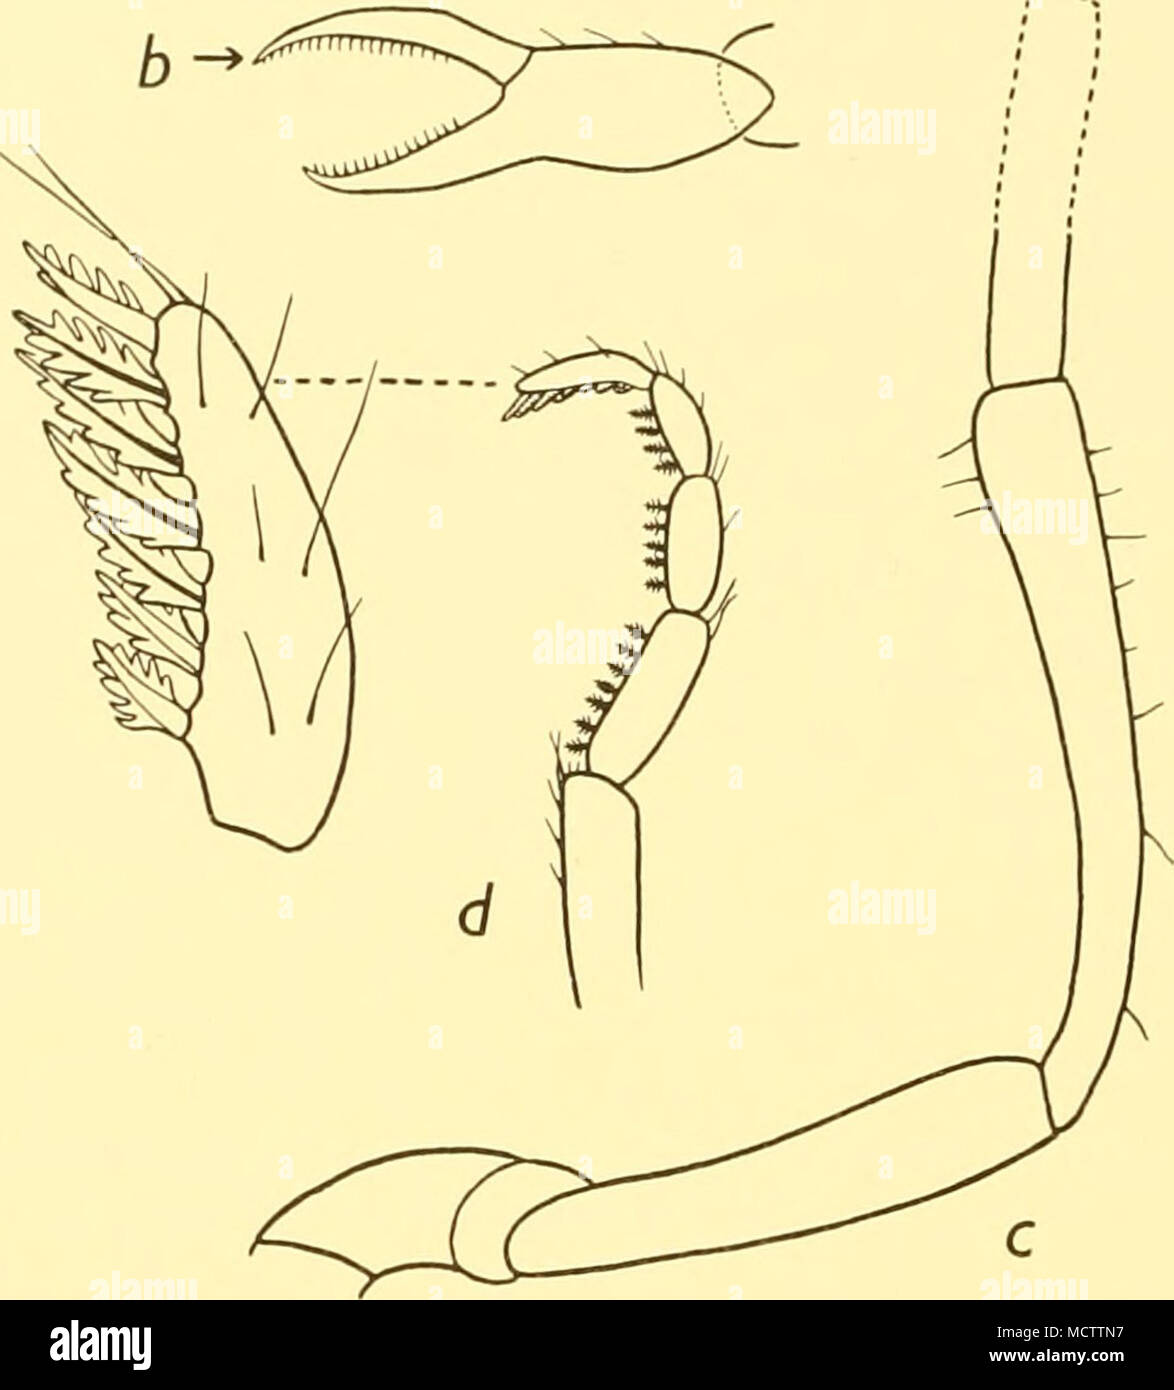 . Fig. 39. HeteronymphoH kempi, gtn. etsp.n.: a. Palp. b. Chela, c. Segments 3-5 of male ovigerâ6 incom- plete, d. Segments 7-10 of female oviger with loth segment further enlargedâthe denticulate spines are not accurately represented in the smaller figure, {a and b: â : 100; c and d: x 60 and circ. 240.) segment and is considerably expanded or clubbed distally as in group II of the genus Nymphon (cf. Figs. 39 c and 27). The relative proportions of palpal segments 2-5 differ markedly from those of any Antarctic species of the genus Nymphon. Family PHOXICHILIDAE (PALLENIDAE) Genus Pallene, John Stock Photo